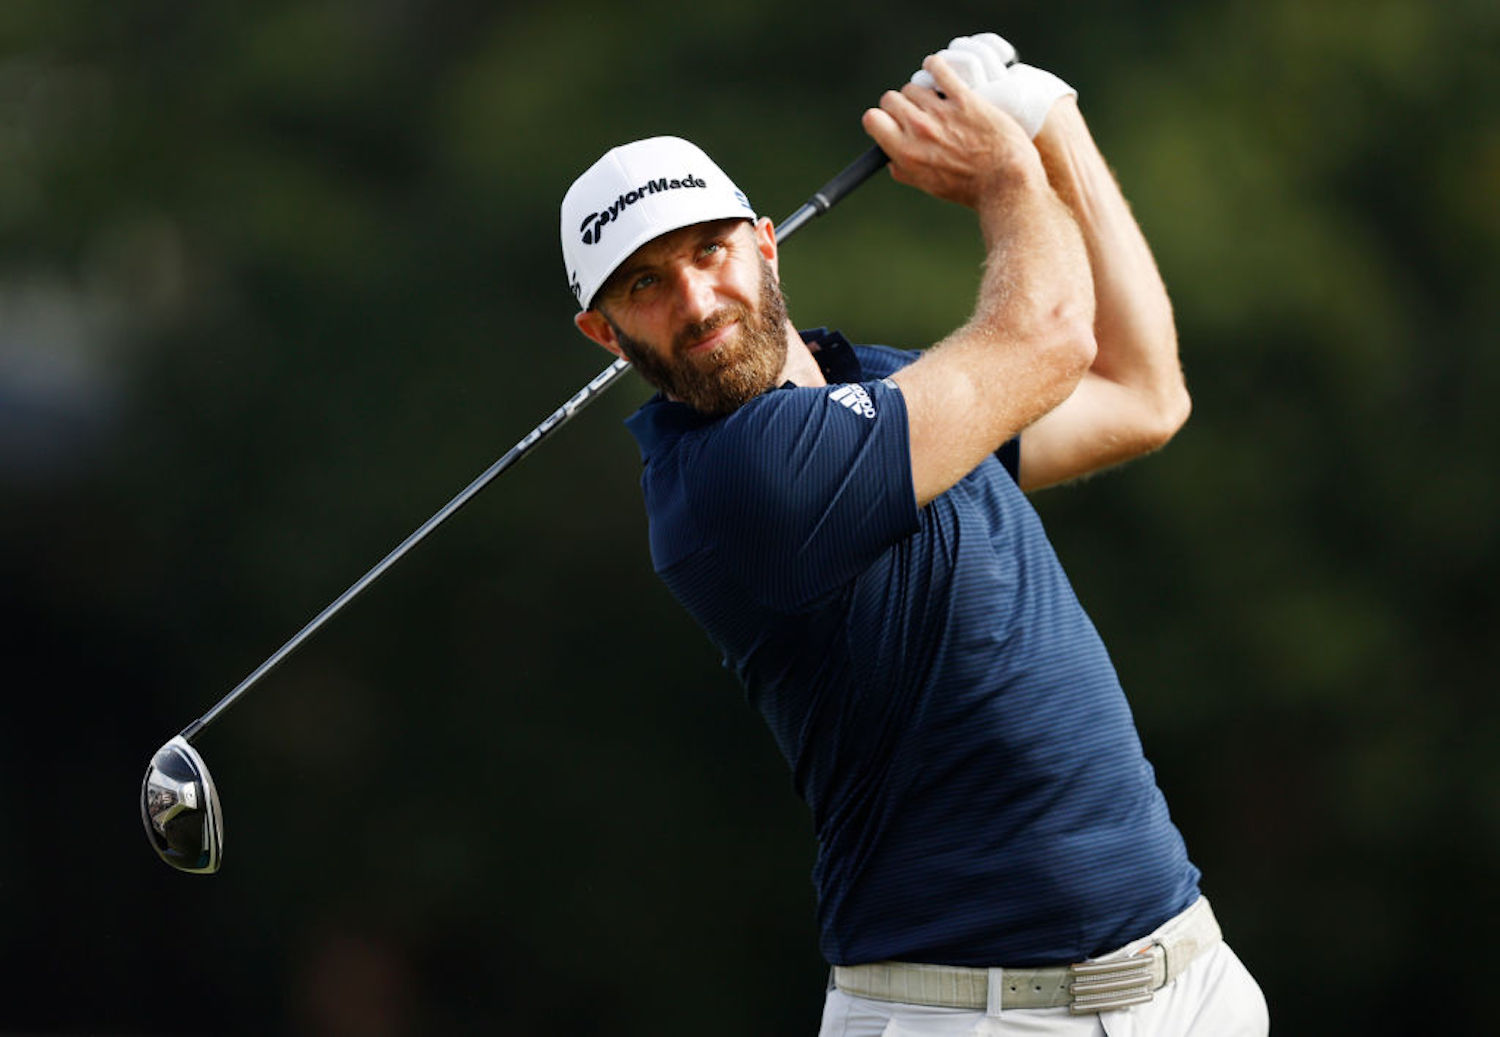 Dustin Johnson missed two weeks recovering from COVID-19, but he just proved he's still the best player on the PGA Tour.